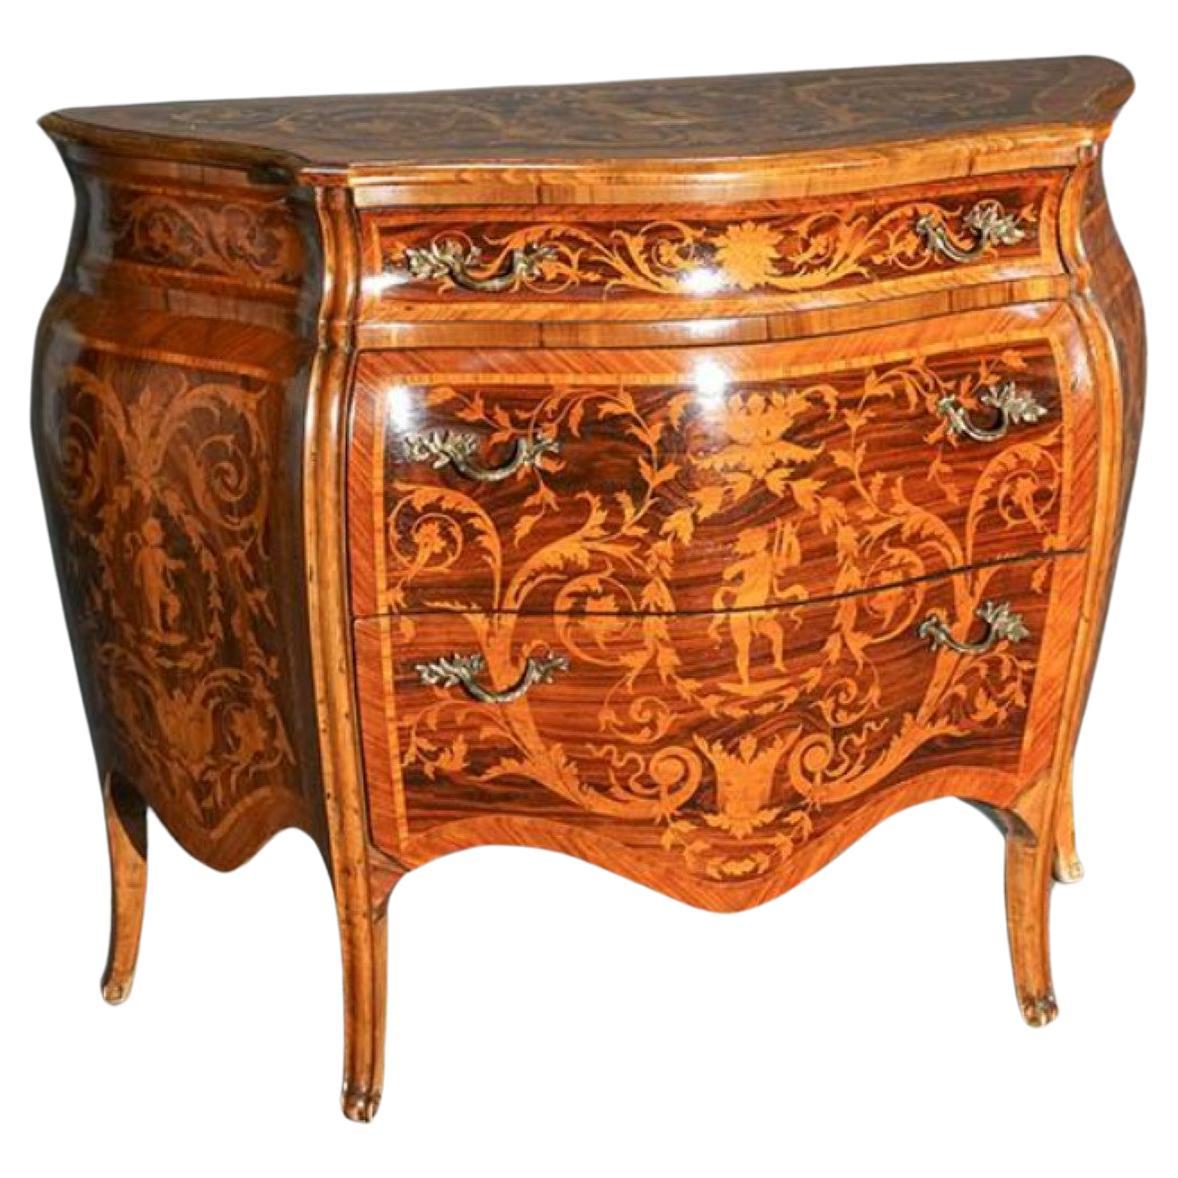 19th C. Lombard Italian Rococo Marquetry Kingwood and Tulipwood Bombé Commode For Sale